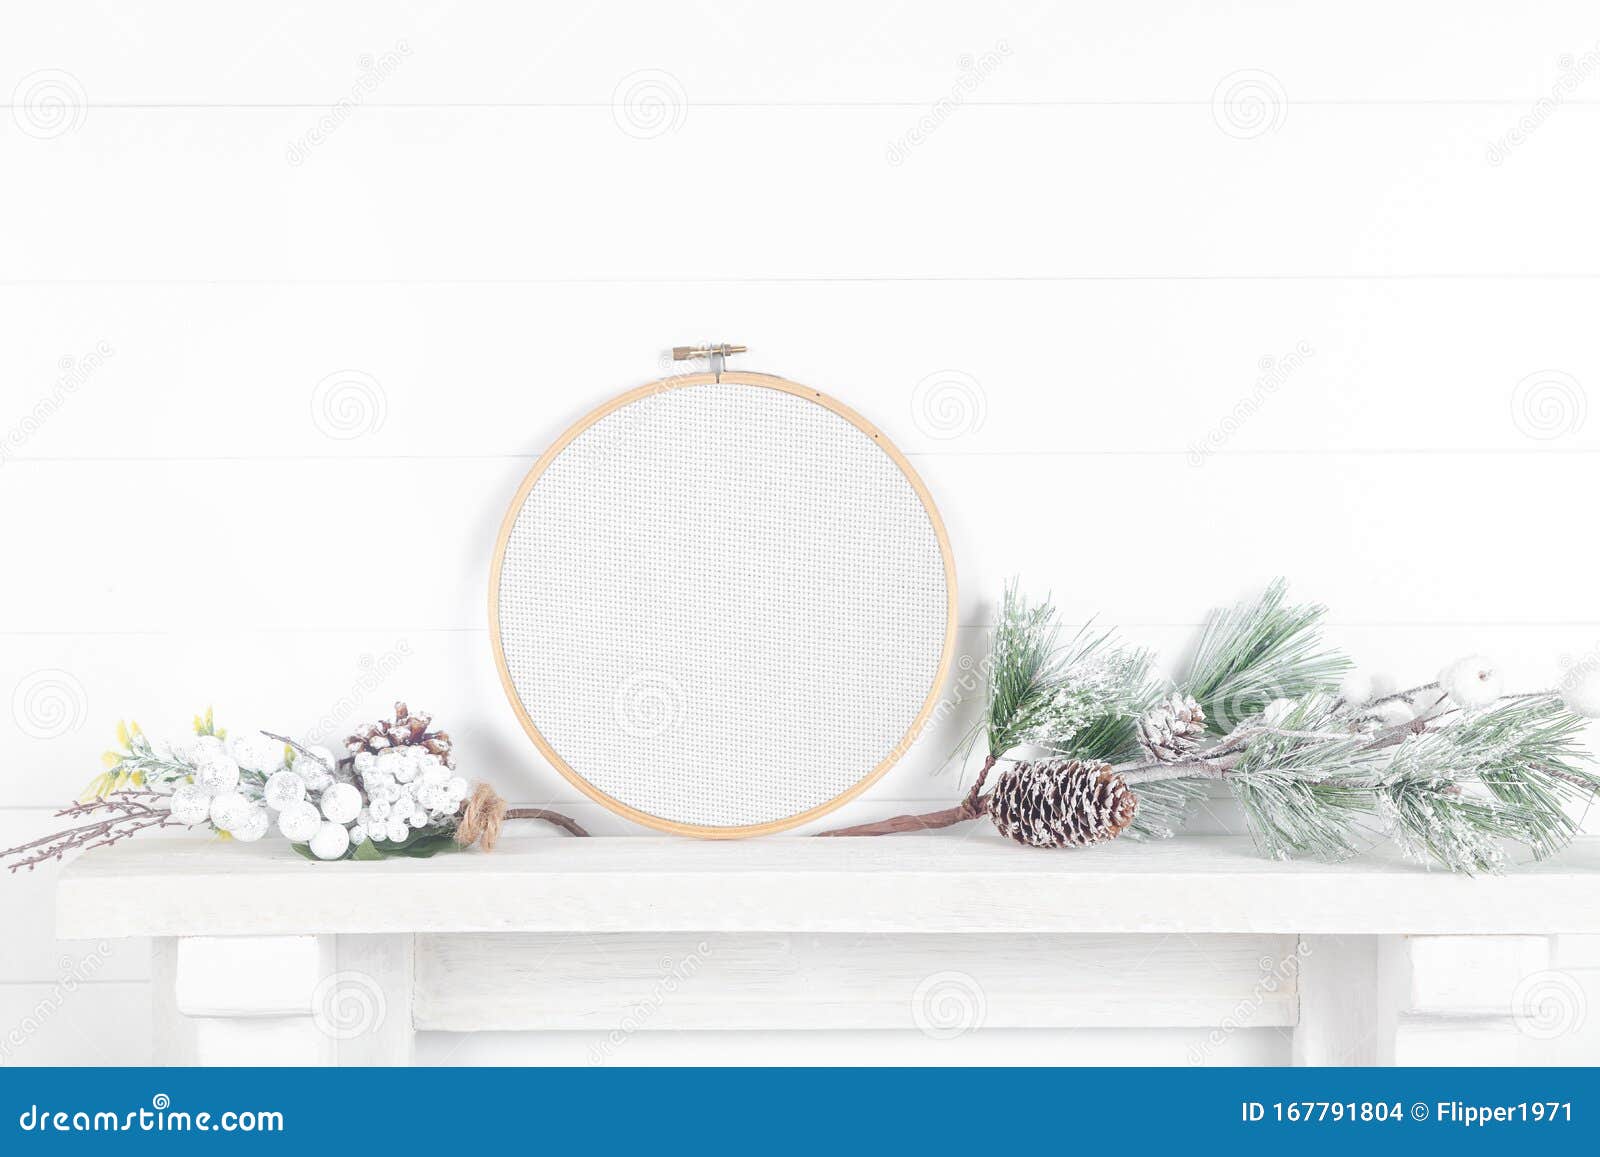 Embroidery Hoop Mockup on Light Background Stock Photo - Image of  decoration, embroidery: 167791804